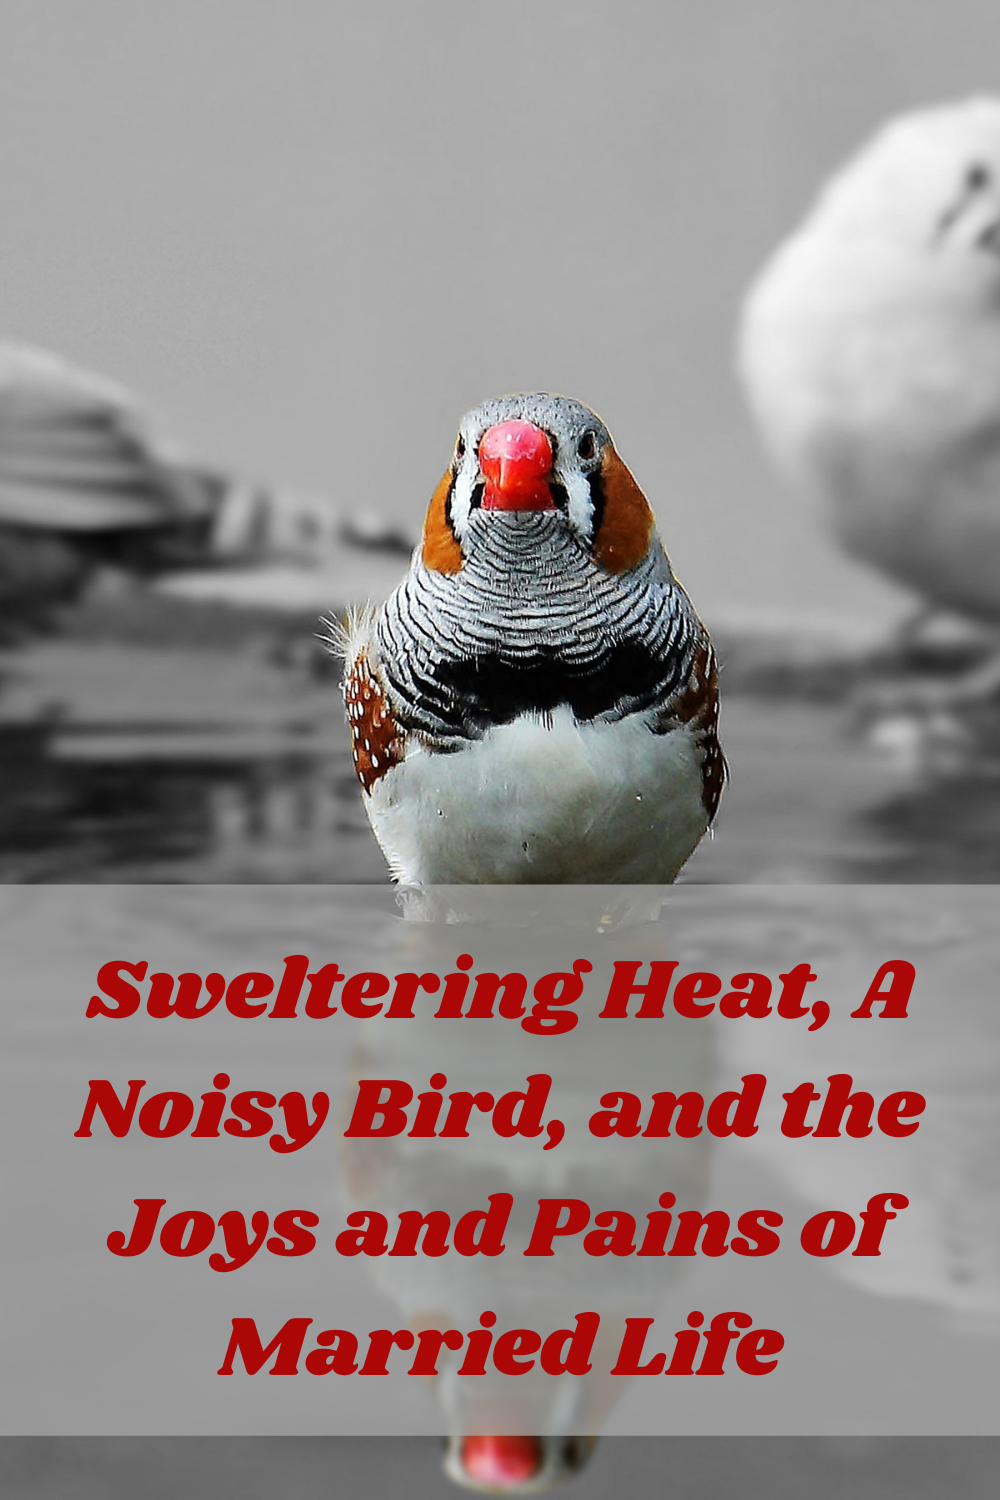 Sweltering Heat, A Noisy Bird, and the Joys and Pains of Married Life